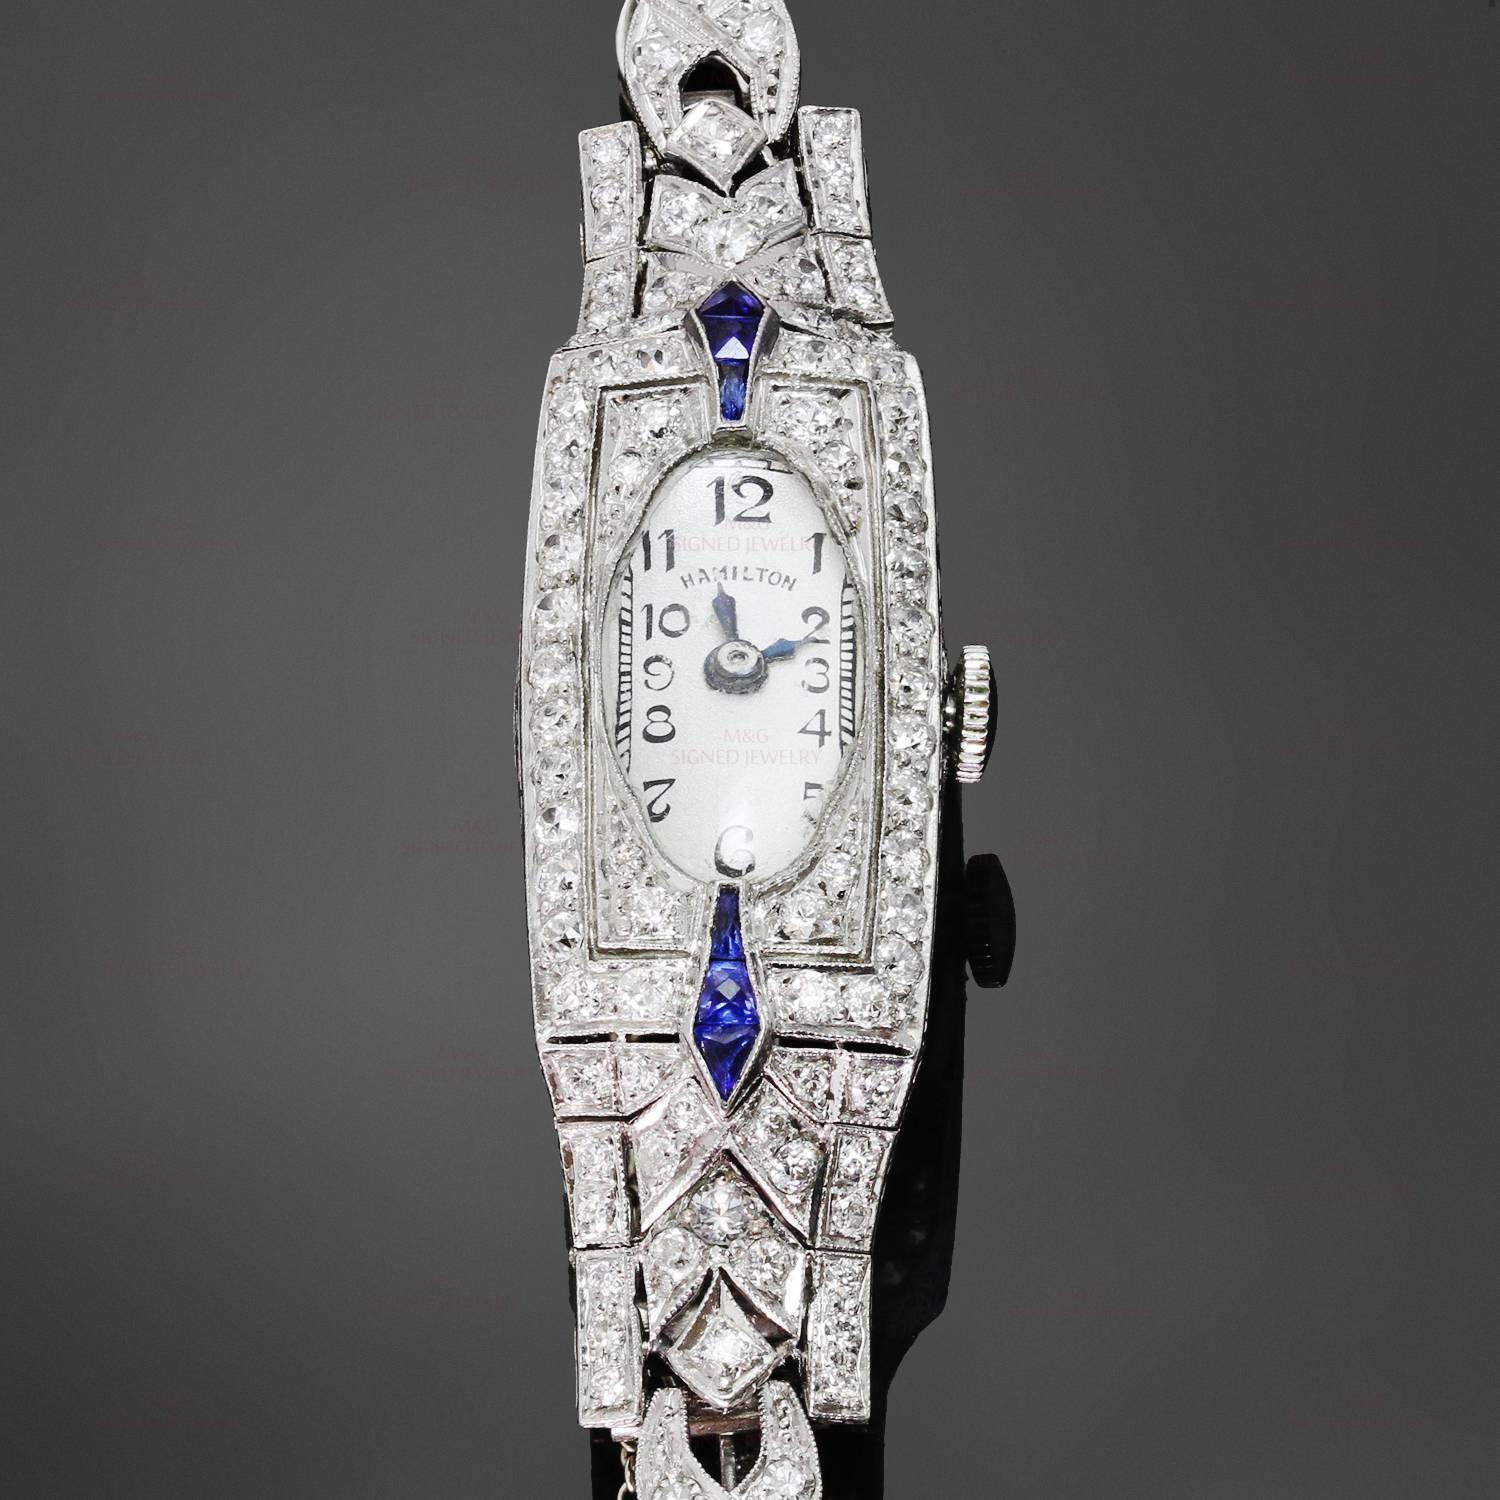 This stunning antique Hamilton manual wind watch is crafted in platinum and set with blue sapphires and 127 French-cut diamonds of an estimated 2.95 carats. The oval face displays the maker's mark Hamilton and is fitted with shaped blue hands. Made